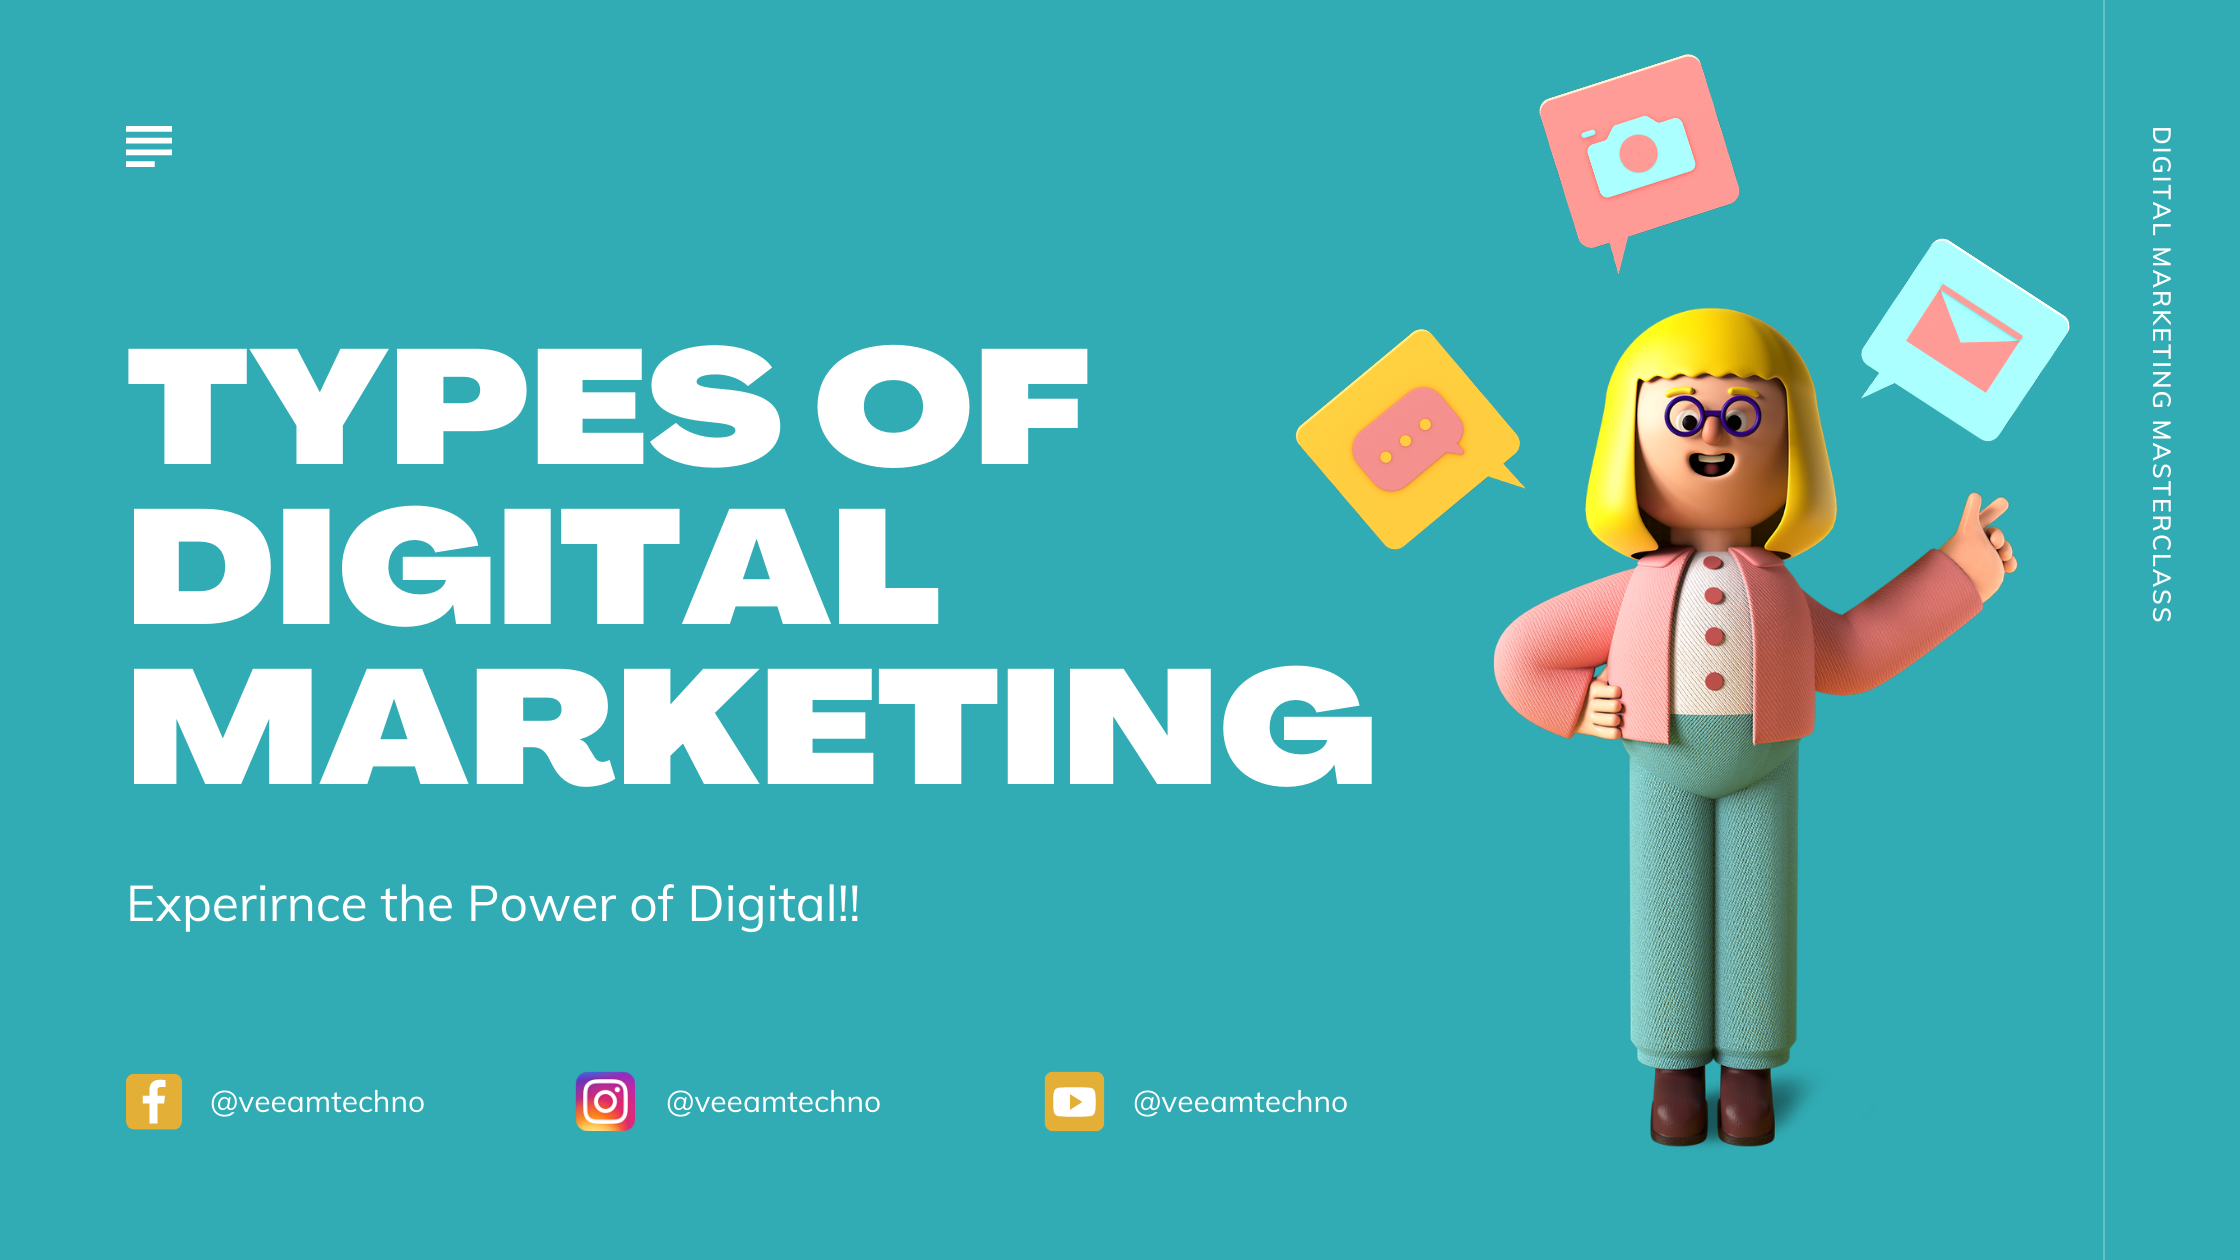 What are the Types of Digital Marketing